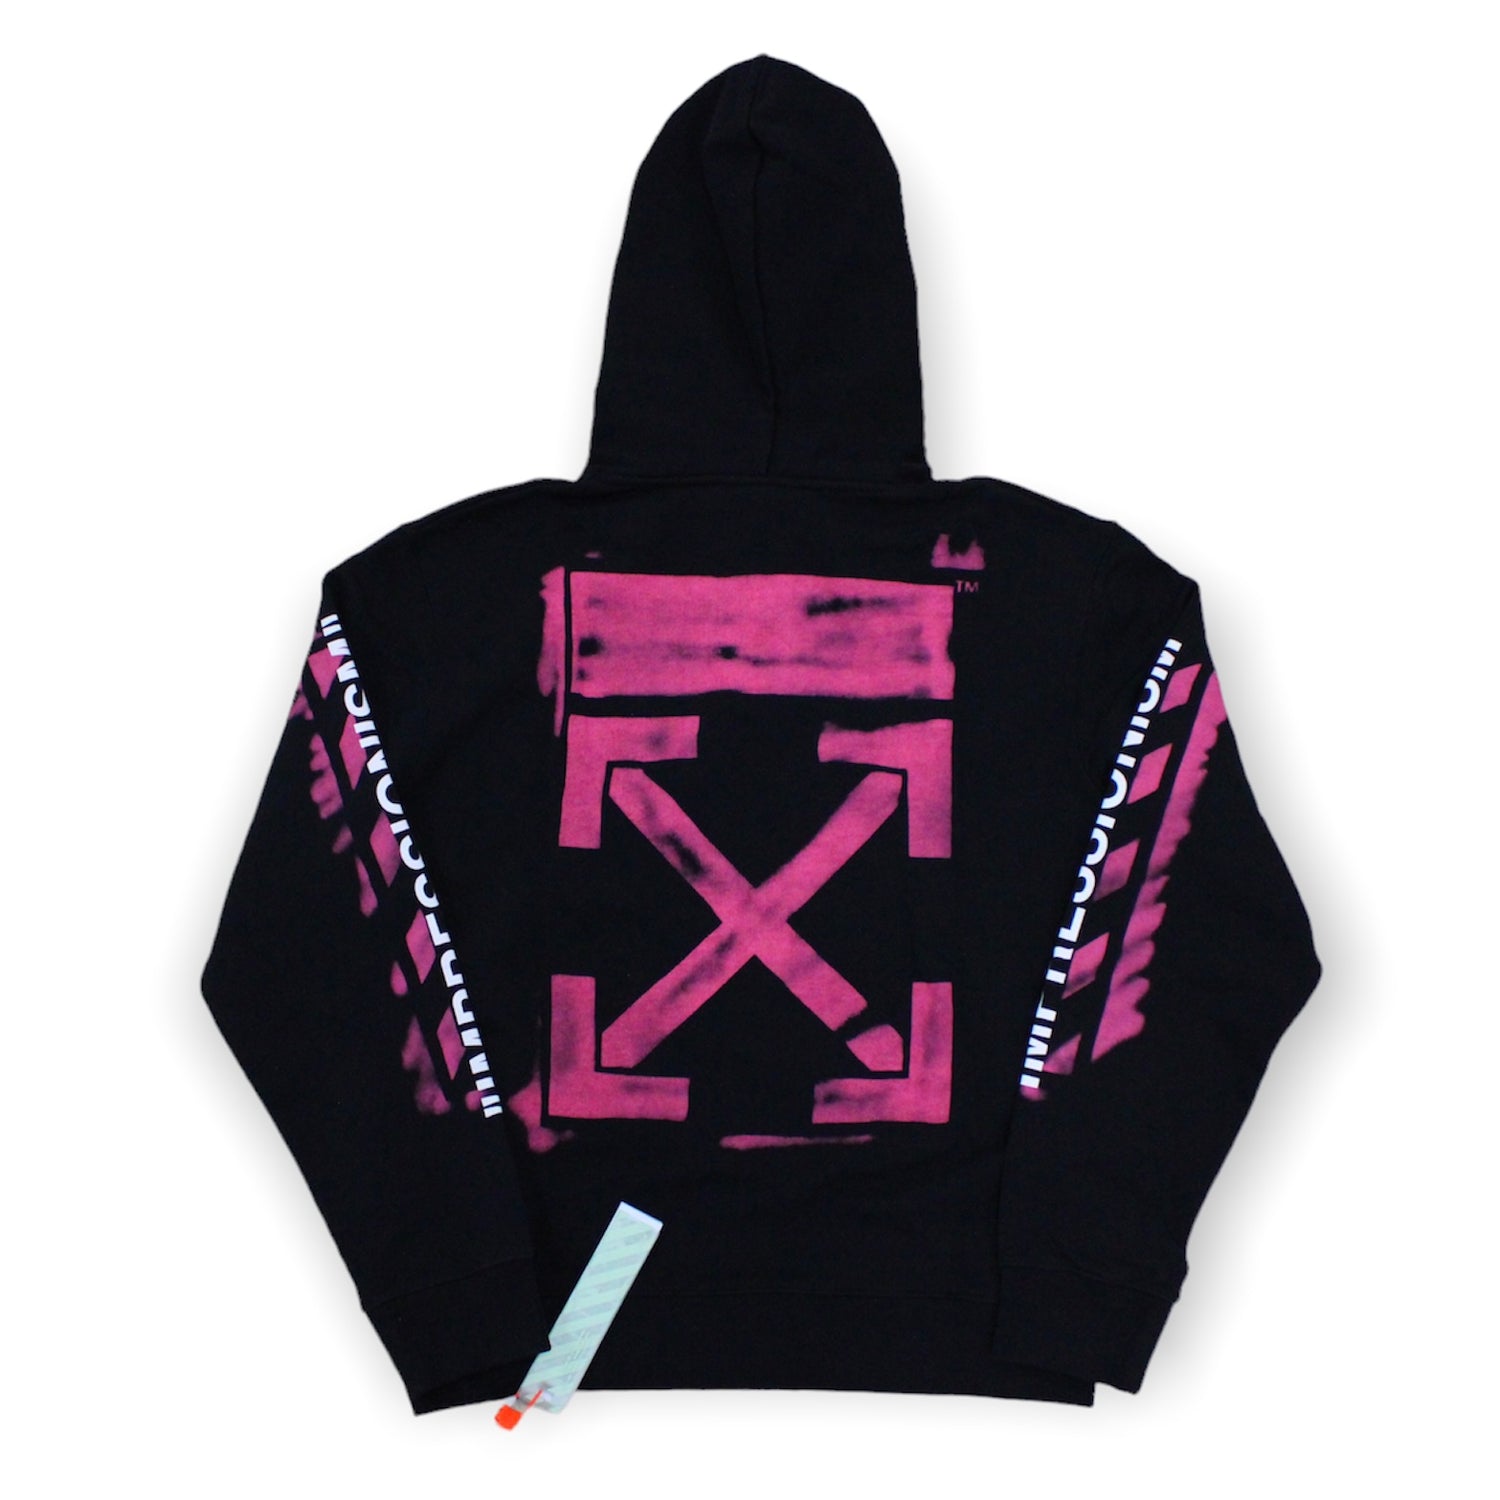 Sightseeing Transcend talsmand Off white black hoodie with pink spray paint hoodie – Upper Level 916